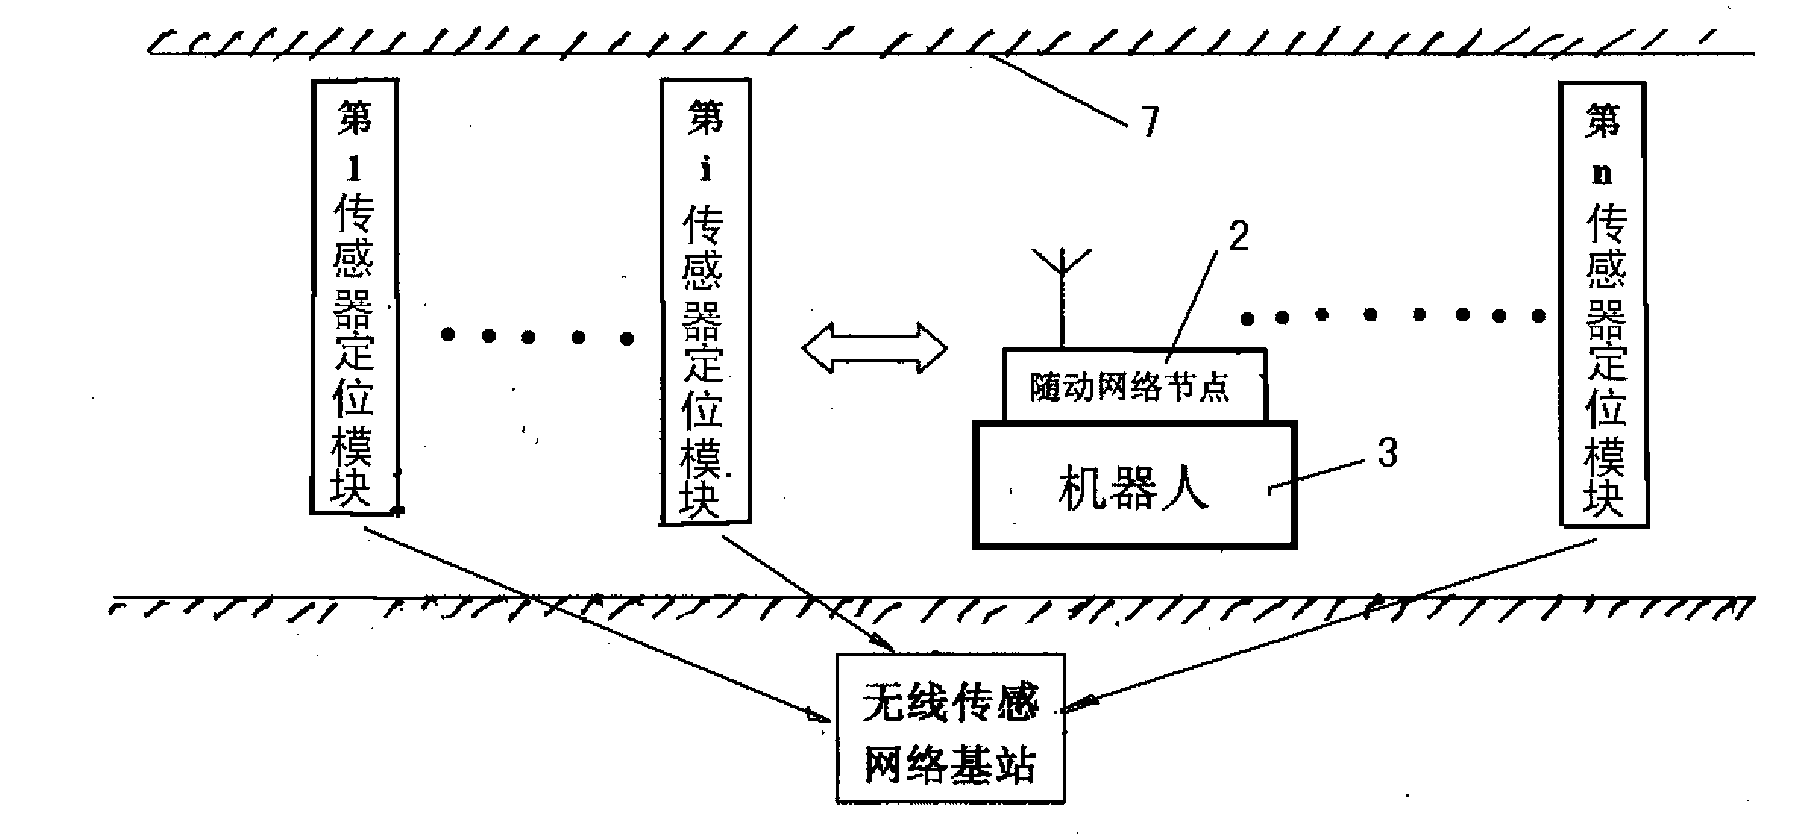 System and method for positioning inspection robot in cable tunnel on basis of wireless network